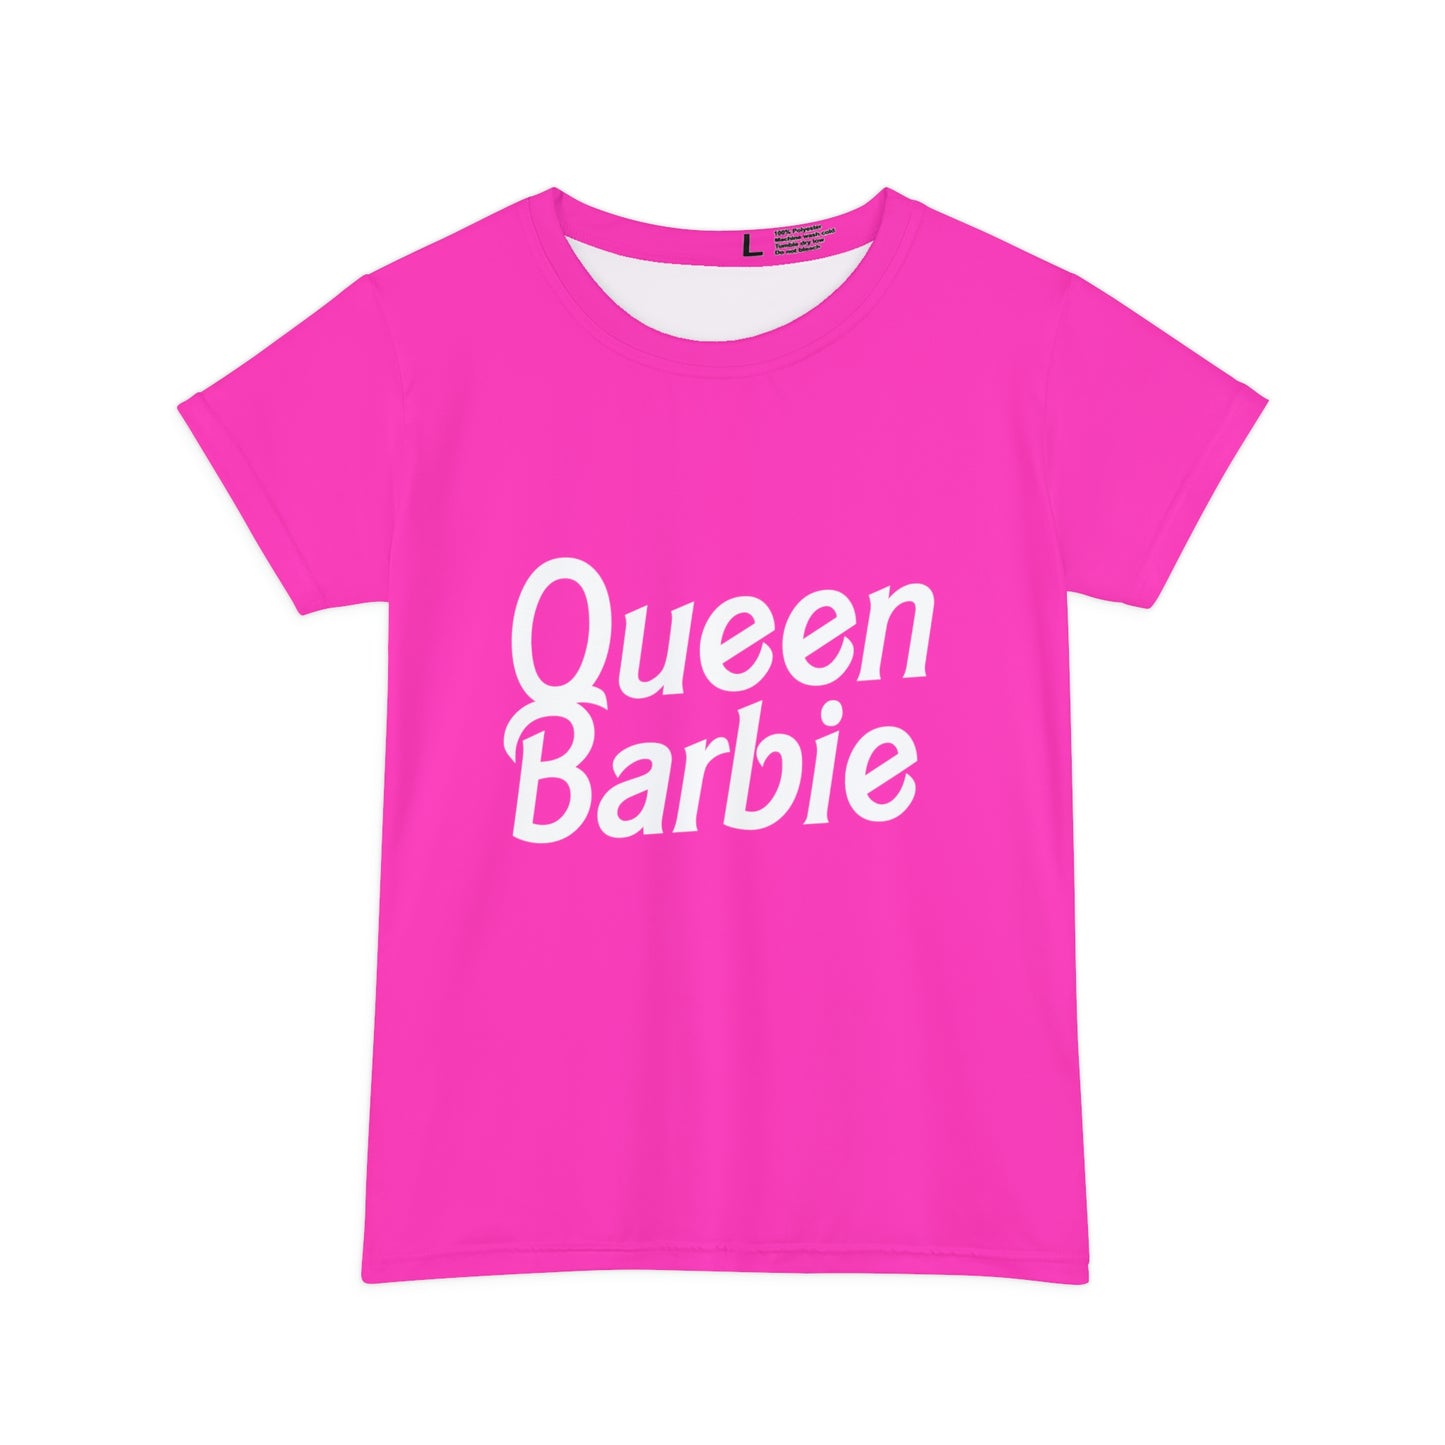 Queen Barbie, Bachelorette Party Shirts, Bridesmaid Gifts, Here comes the Party Tees, Group Party Favor Shirts, Bridal Party Shirt for women